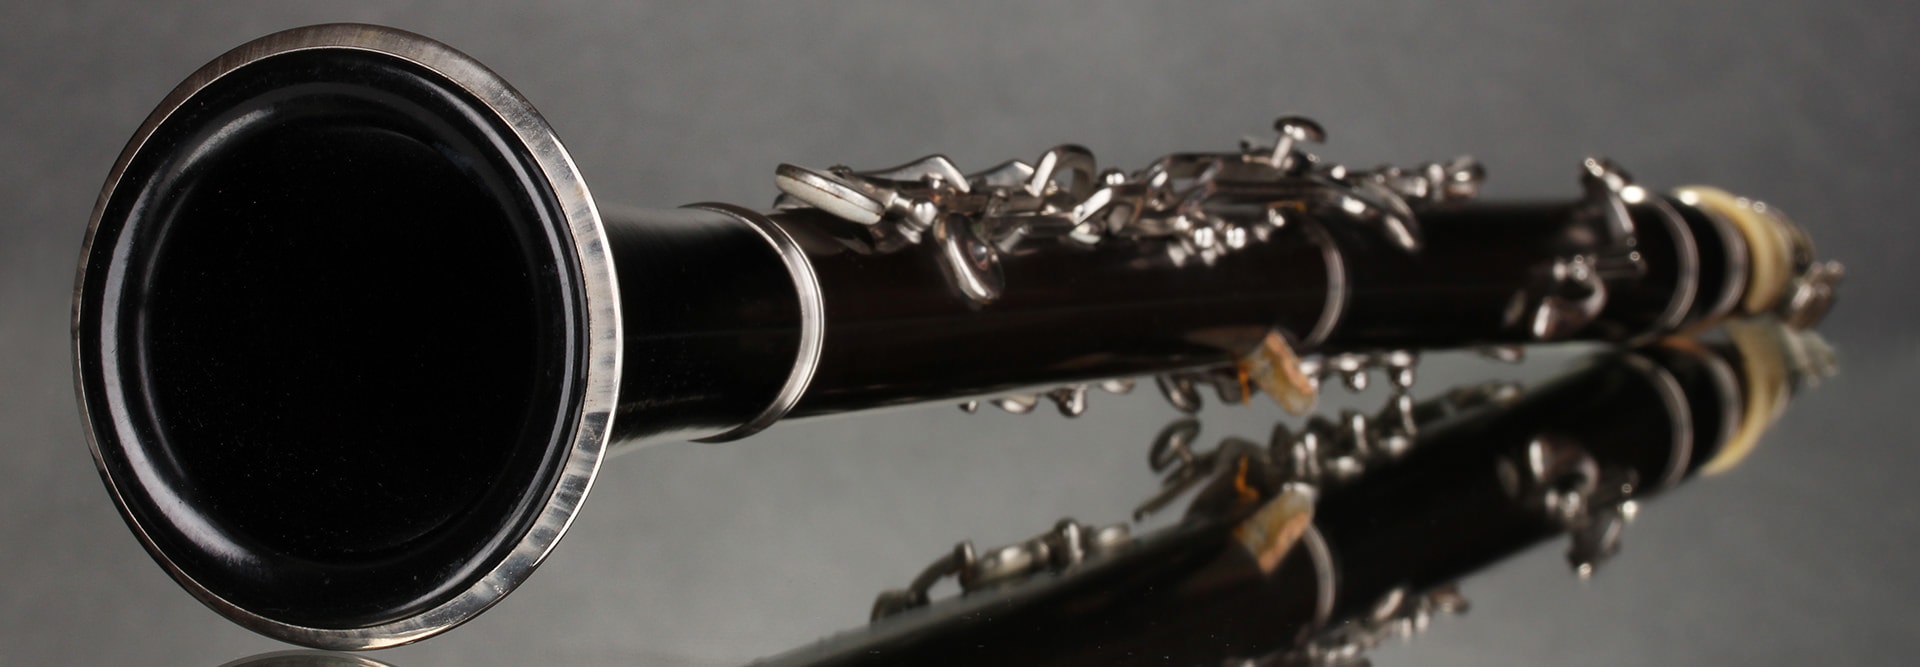 How to Find a Clarinet Teacher?